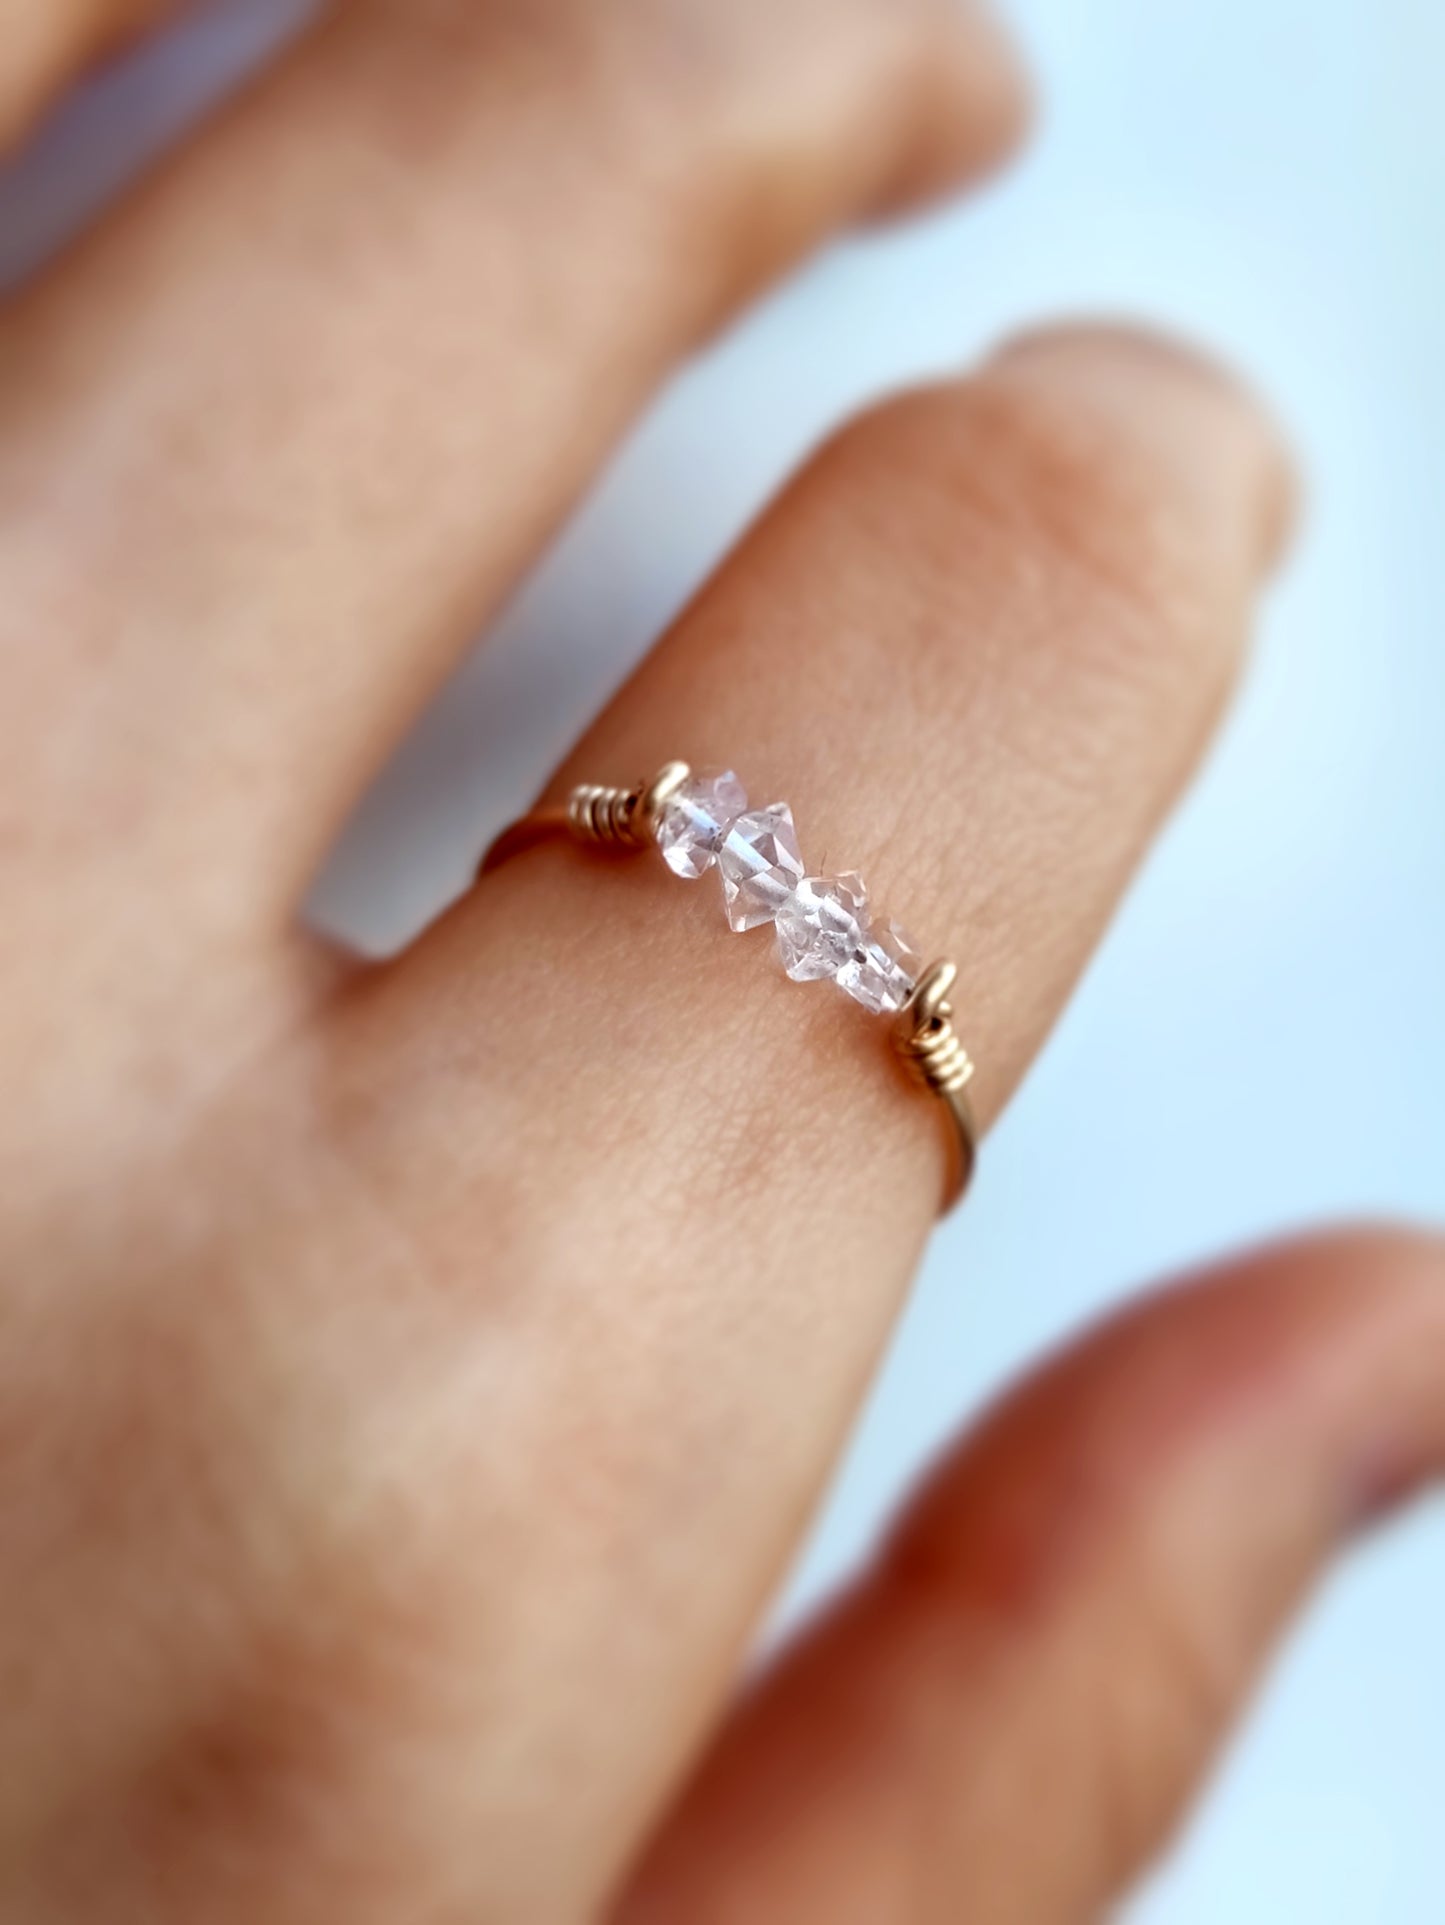 Dainty Raw Herkimer Diamond Ring in 14K Gold Filled